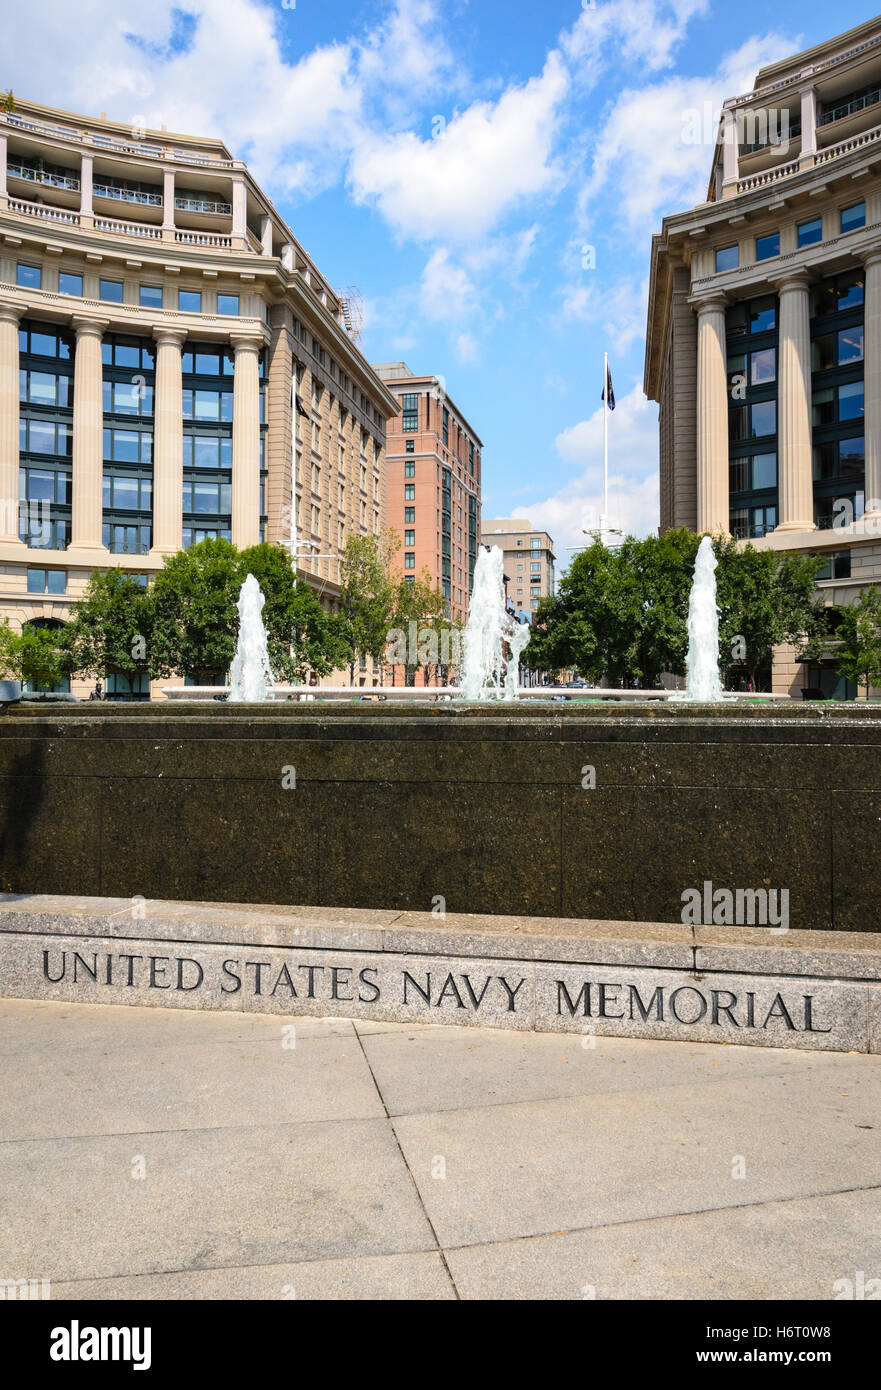 United States Navy Memorial Banque D'Images